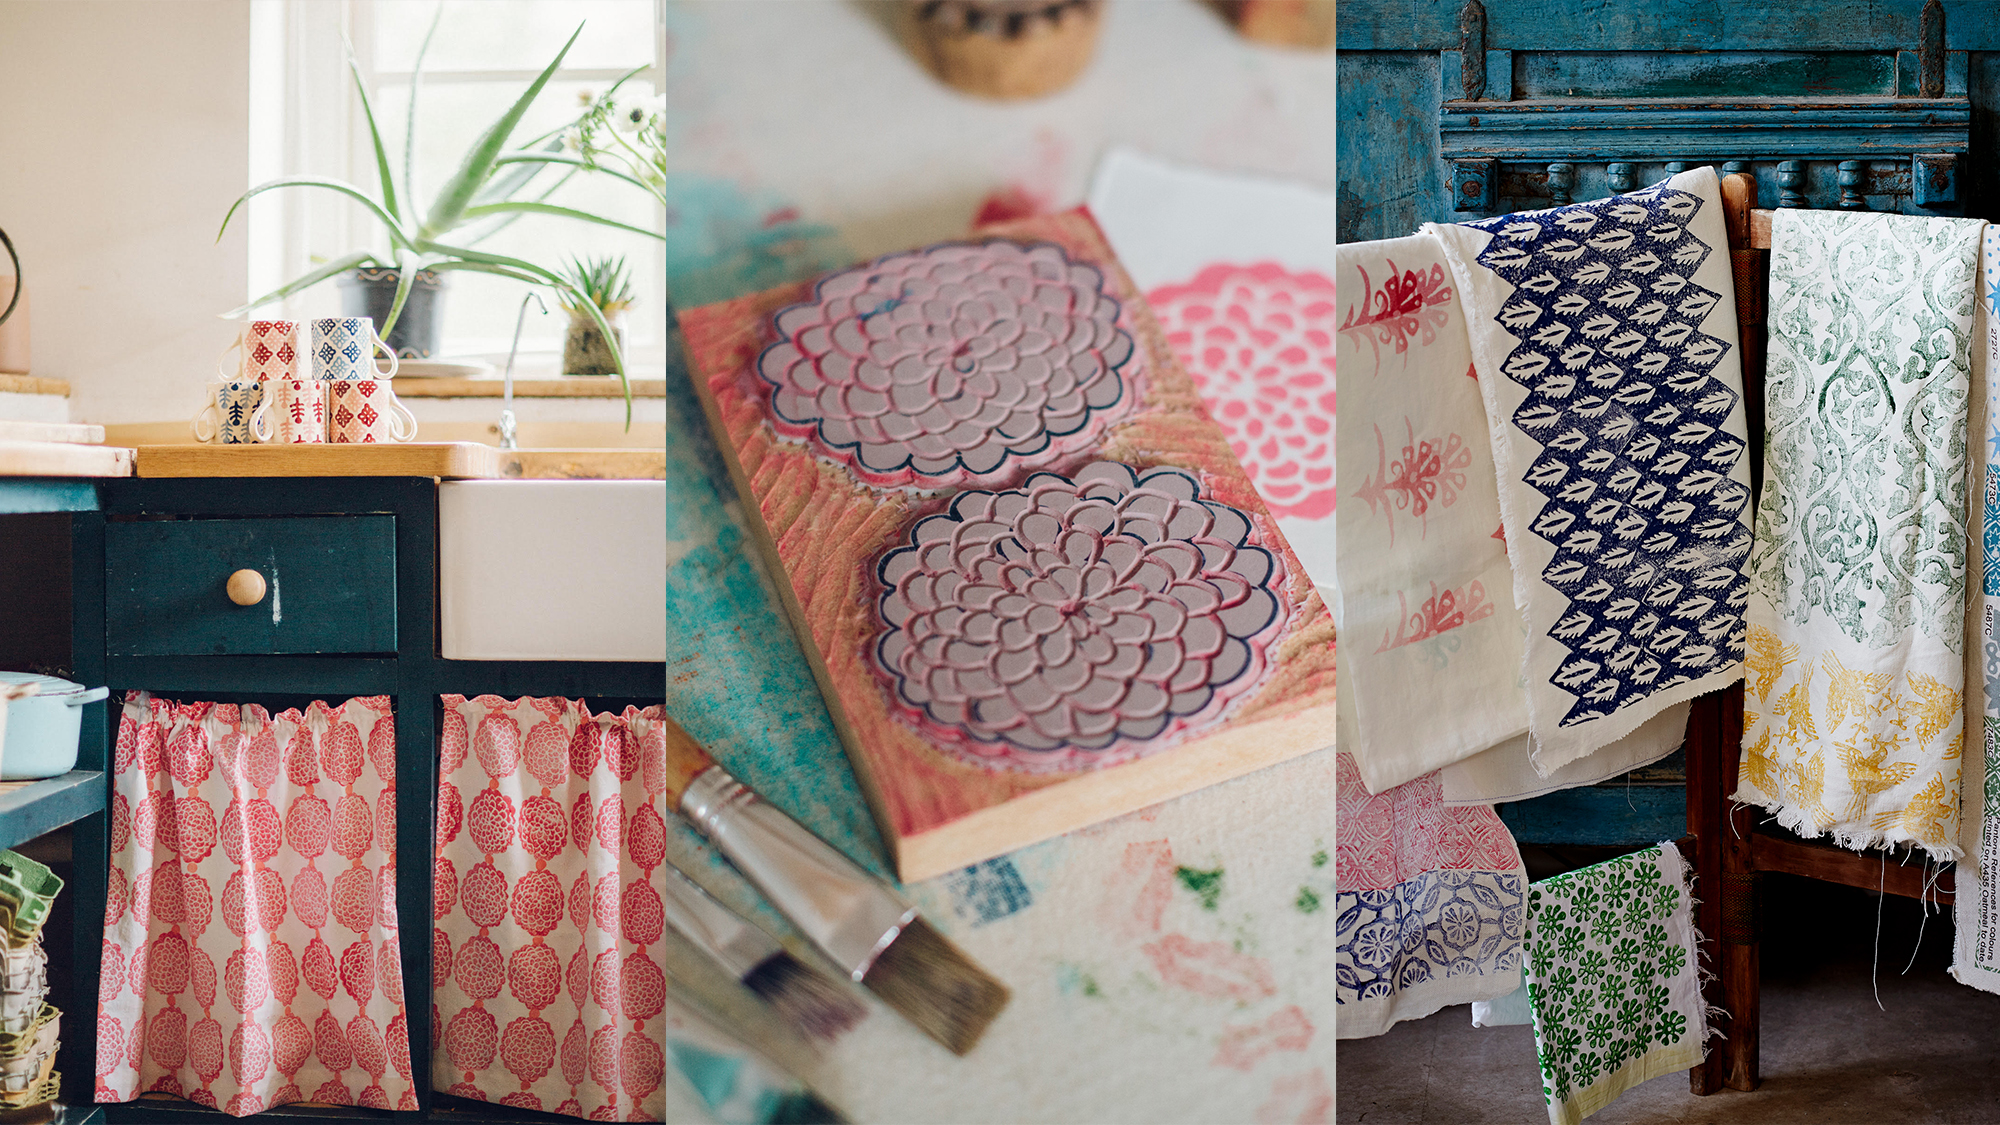 Block printing on fabric: a simple step by step guide